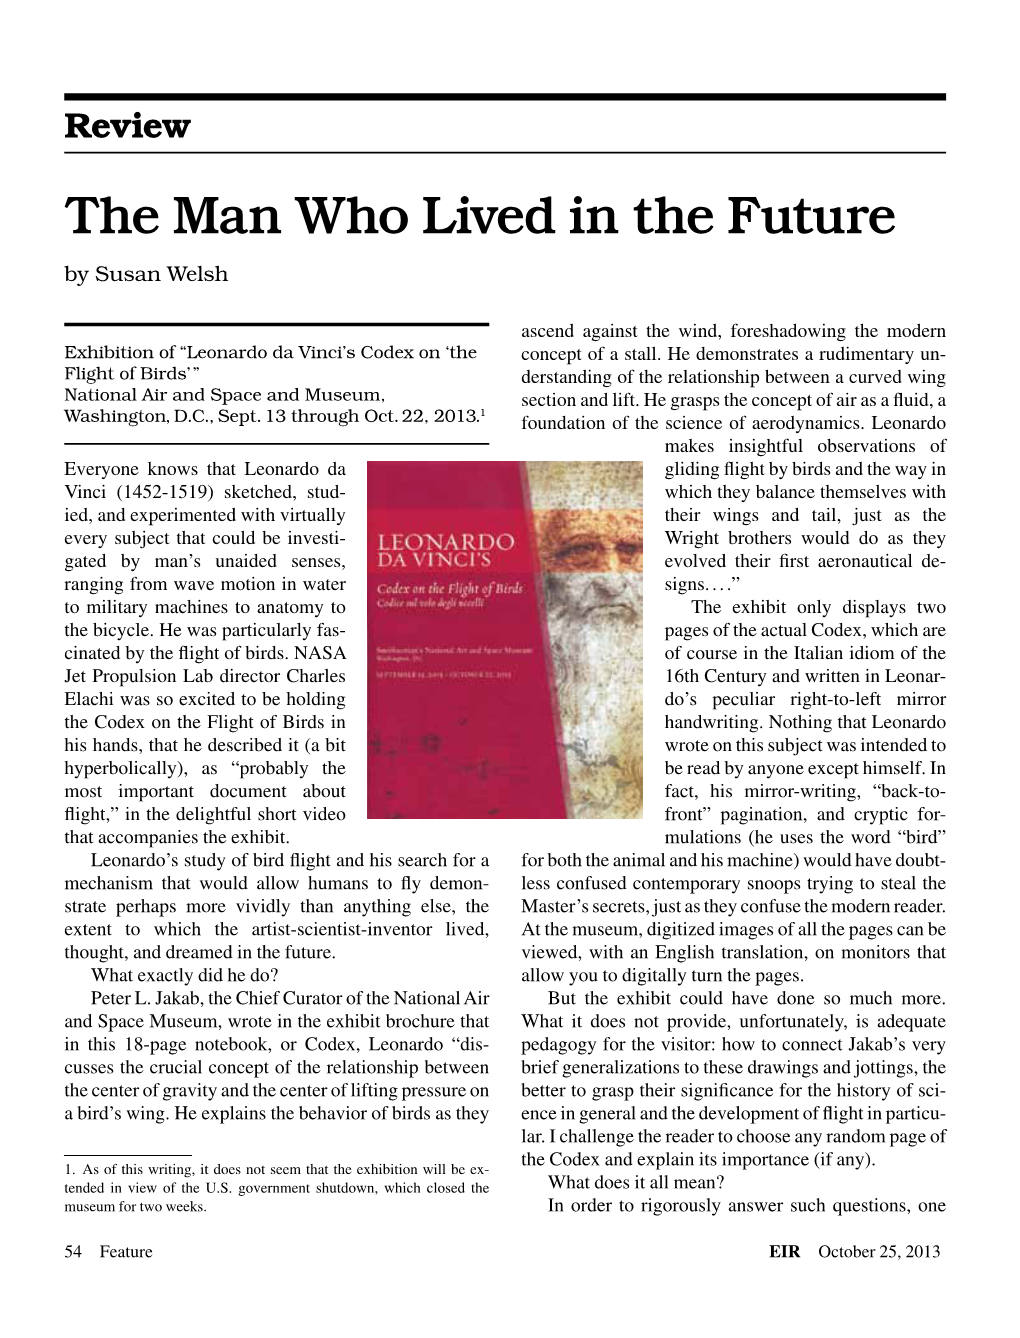 The Man Who Lived in the Future by Susan Welsh